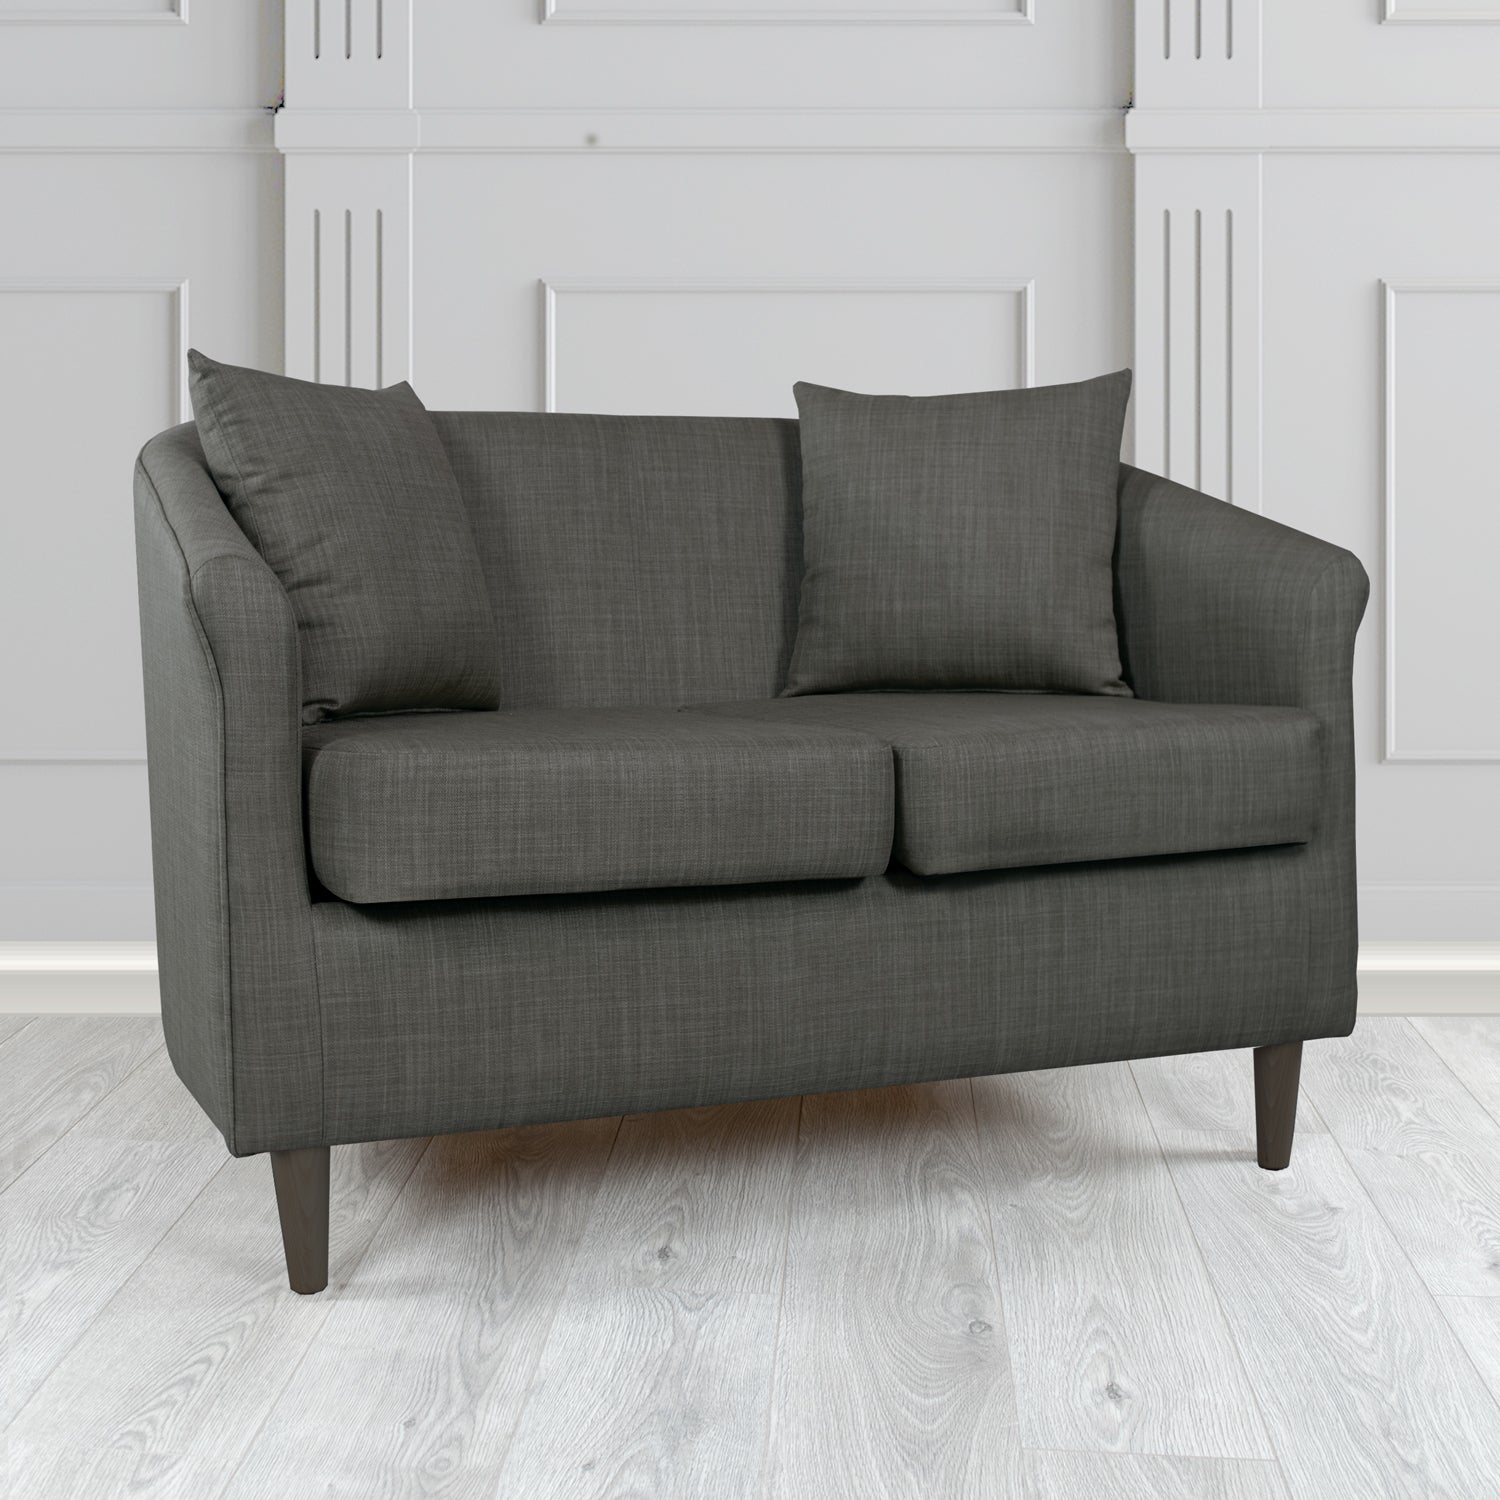 St Tropez Charles Charcoal Plain Linen Fabric 2 Seater Tub Sofa with Scatter Cushions - The Tub Chair Shop